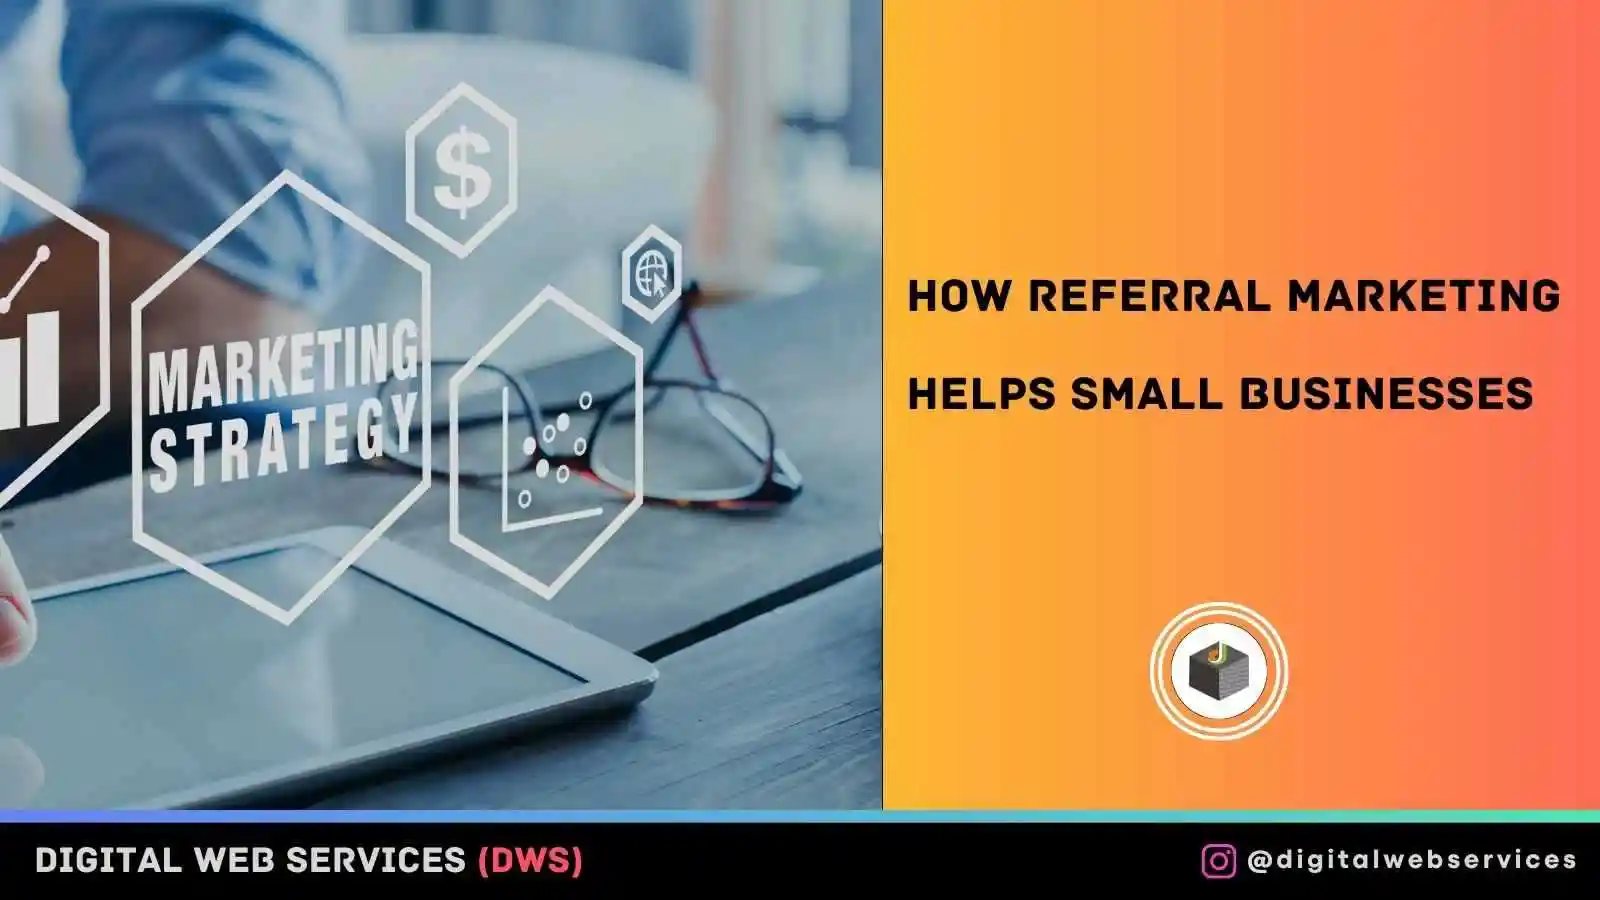 How Referral Marketing Helps Small Businesses